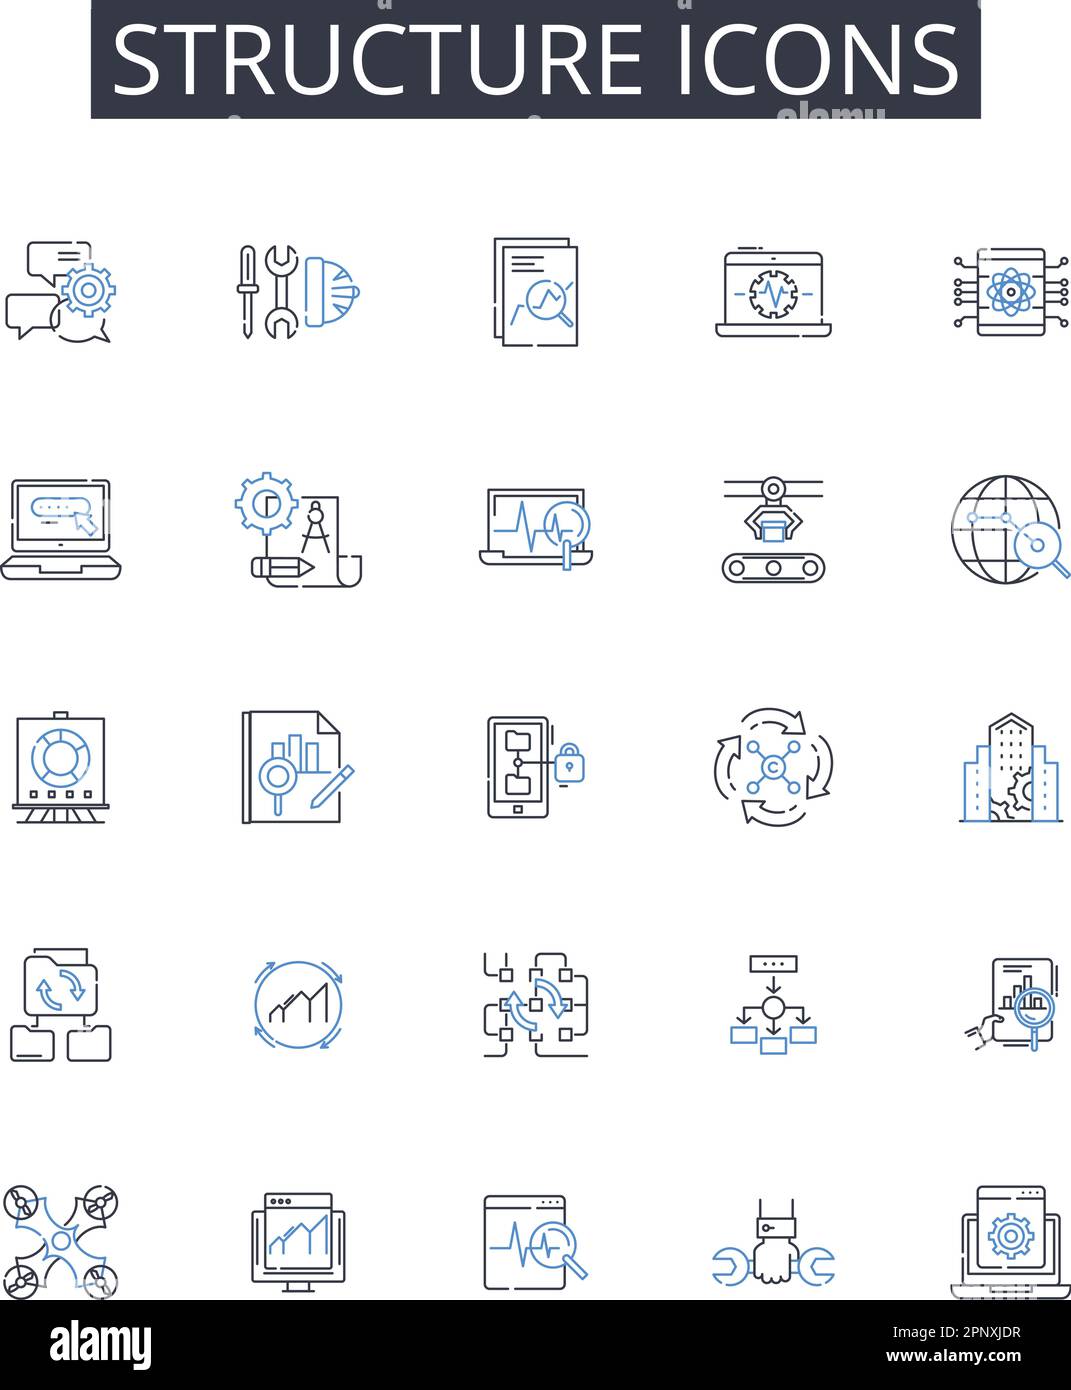 Structure icons line icons collection. Choices, Likes, Dislikes, Tastes, Favourites, Desires, Needs vector and linear illustration. Wishlist,Opinions Stock Vector